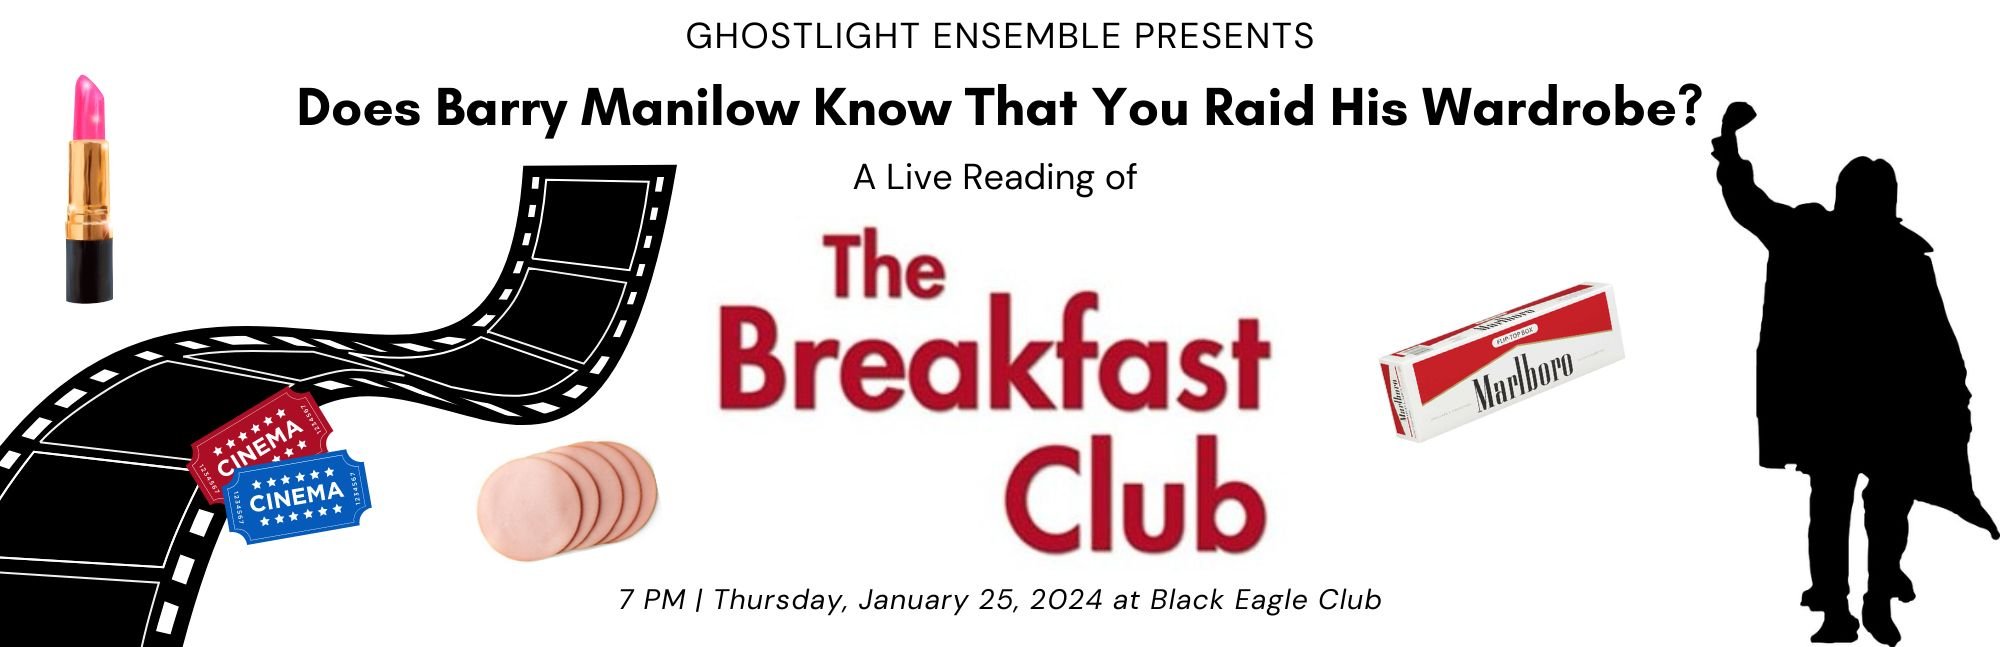 Does Barry Manilow Know That You Raid His Wardrobe? A Live Reading of The Breakfast Club